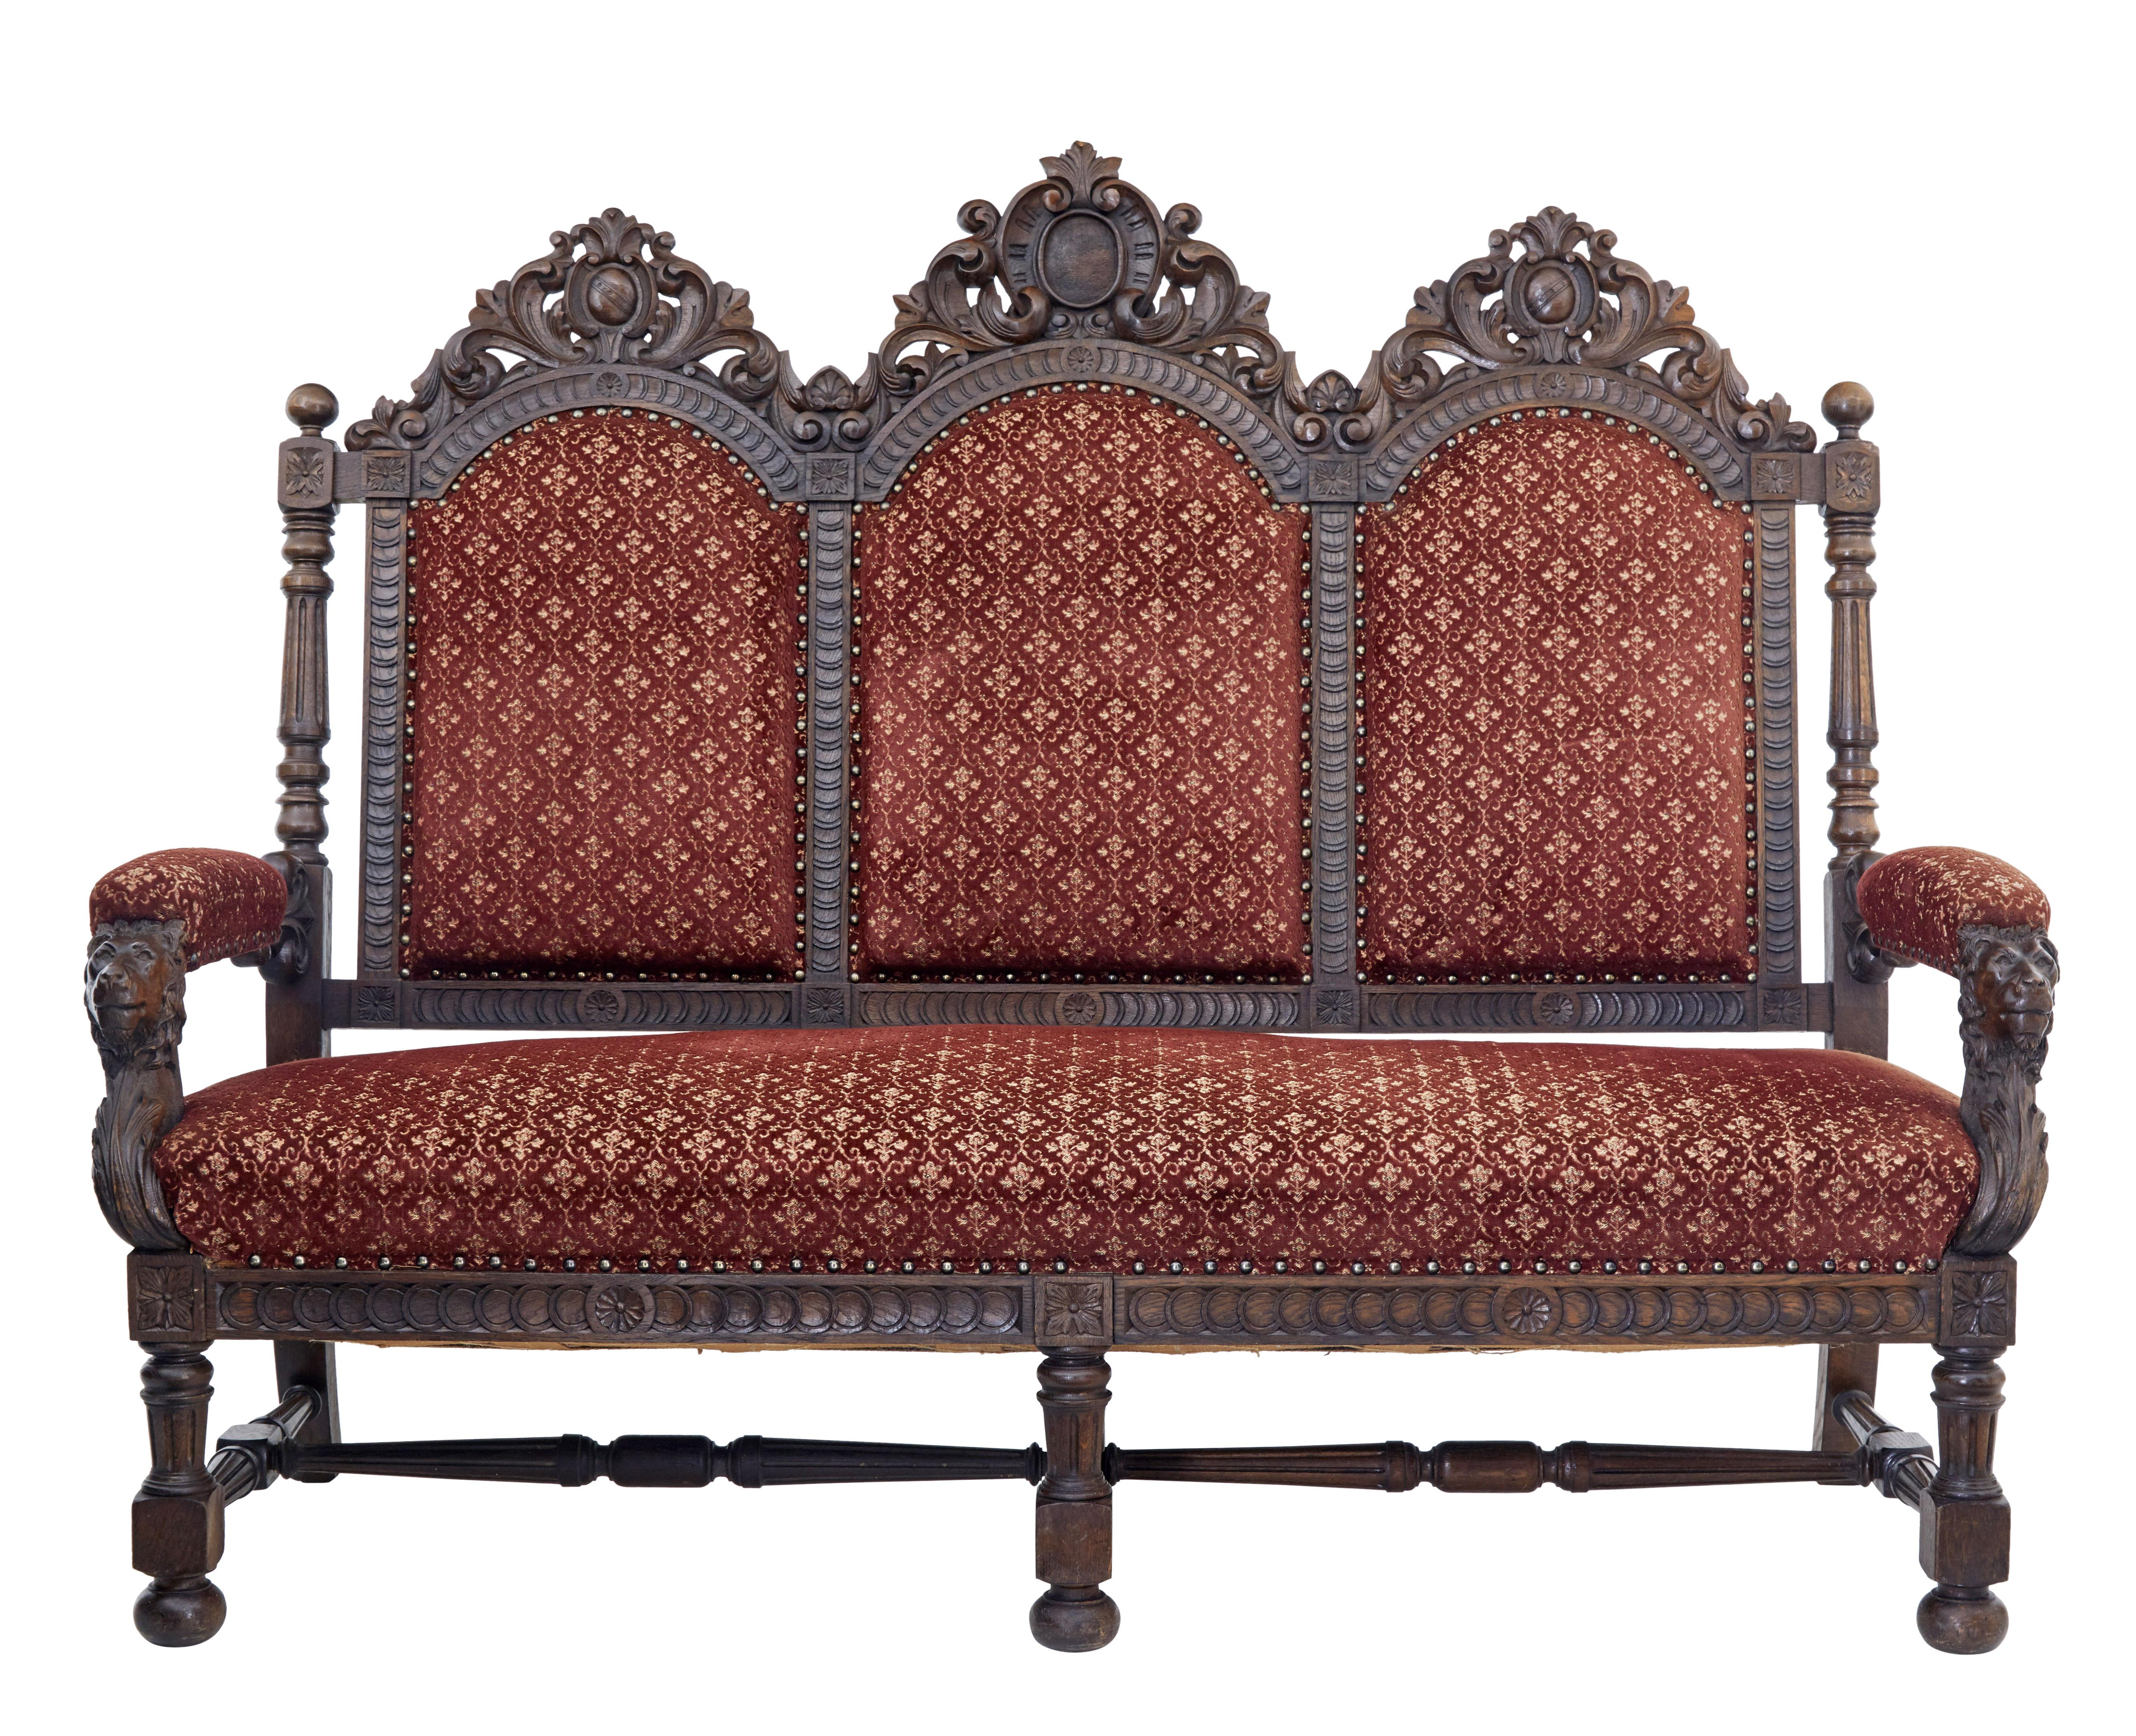 Heavily carved oak sofa, circa 1880.

3-seat sofa, with 3 back panels with heavily carved cartouche and swags on the backrest. 2 carved lions form the supports for the arm rests. Standing on 6 legs united by stretcher.

Upholstery is in good